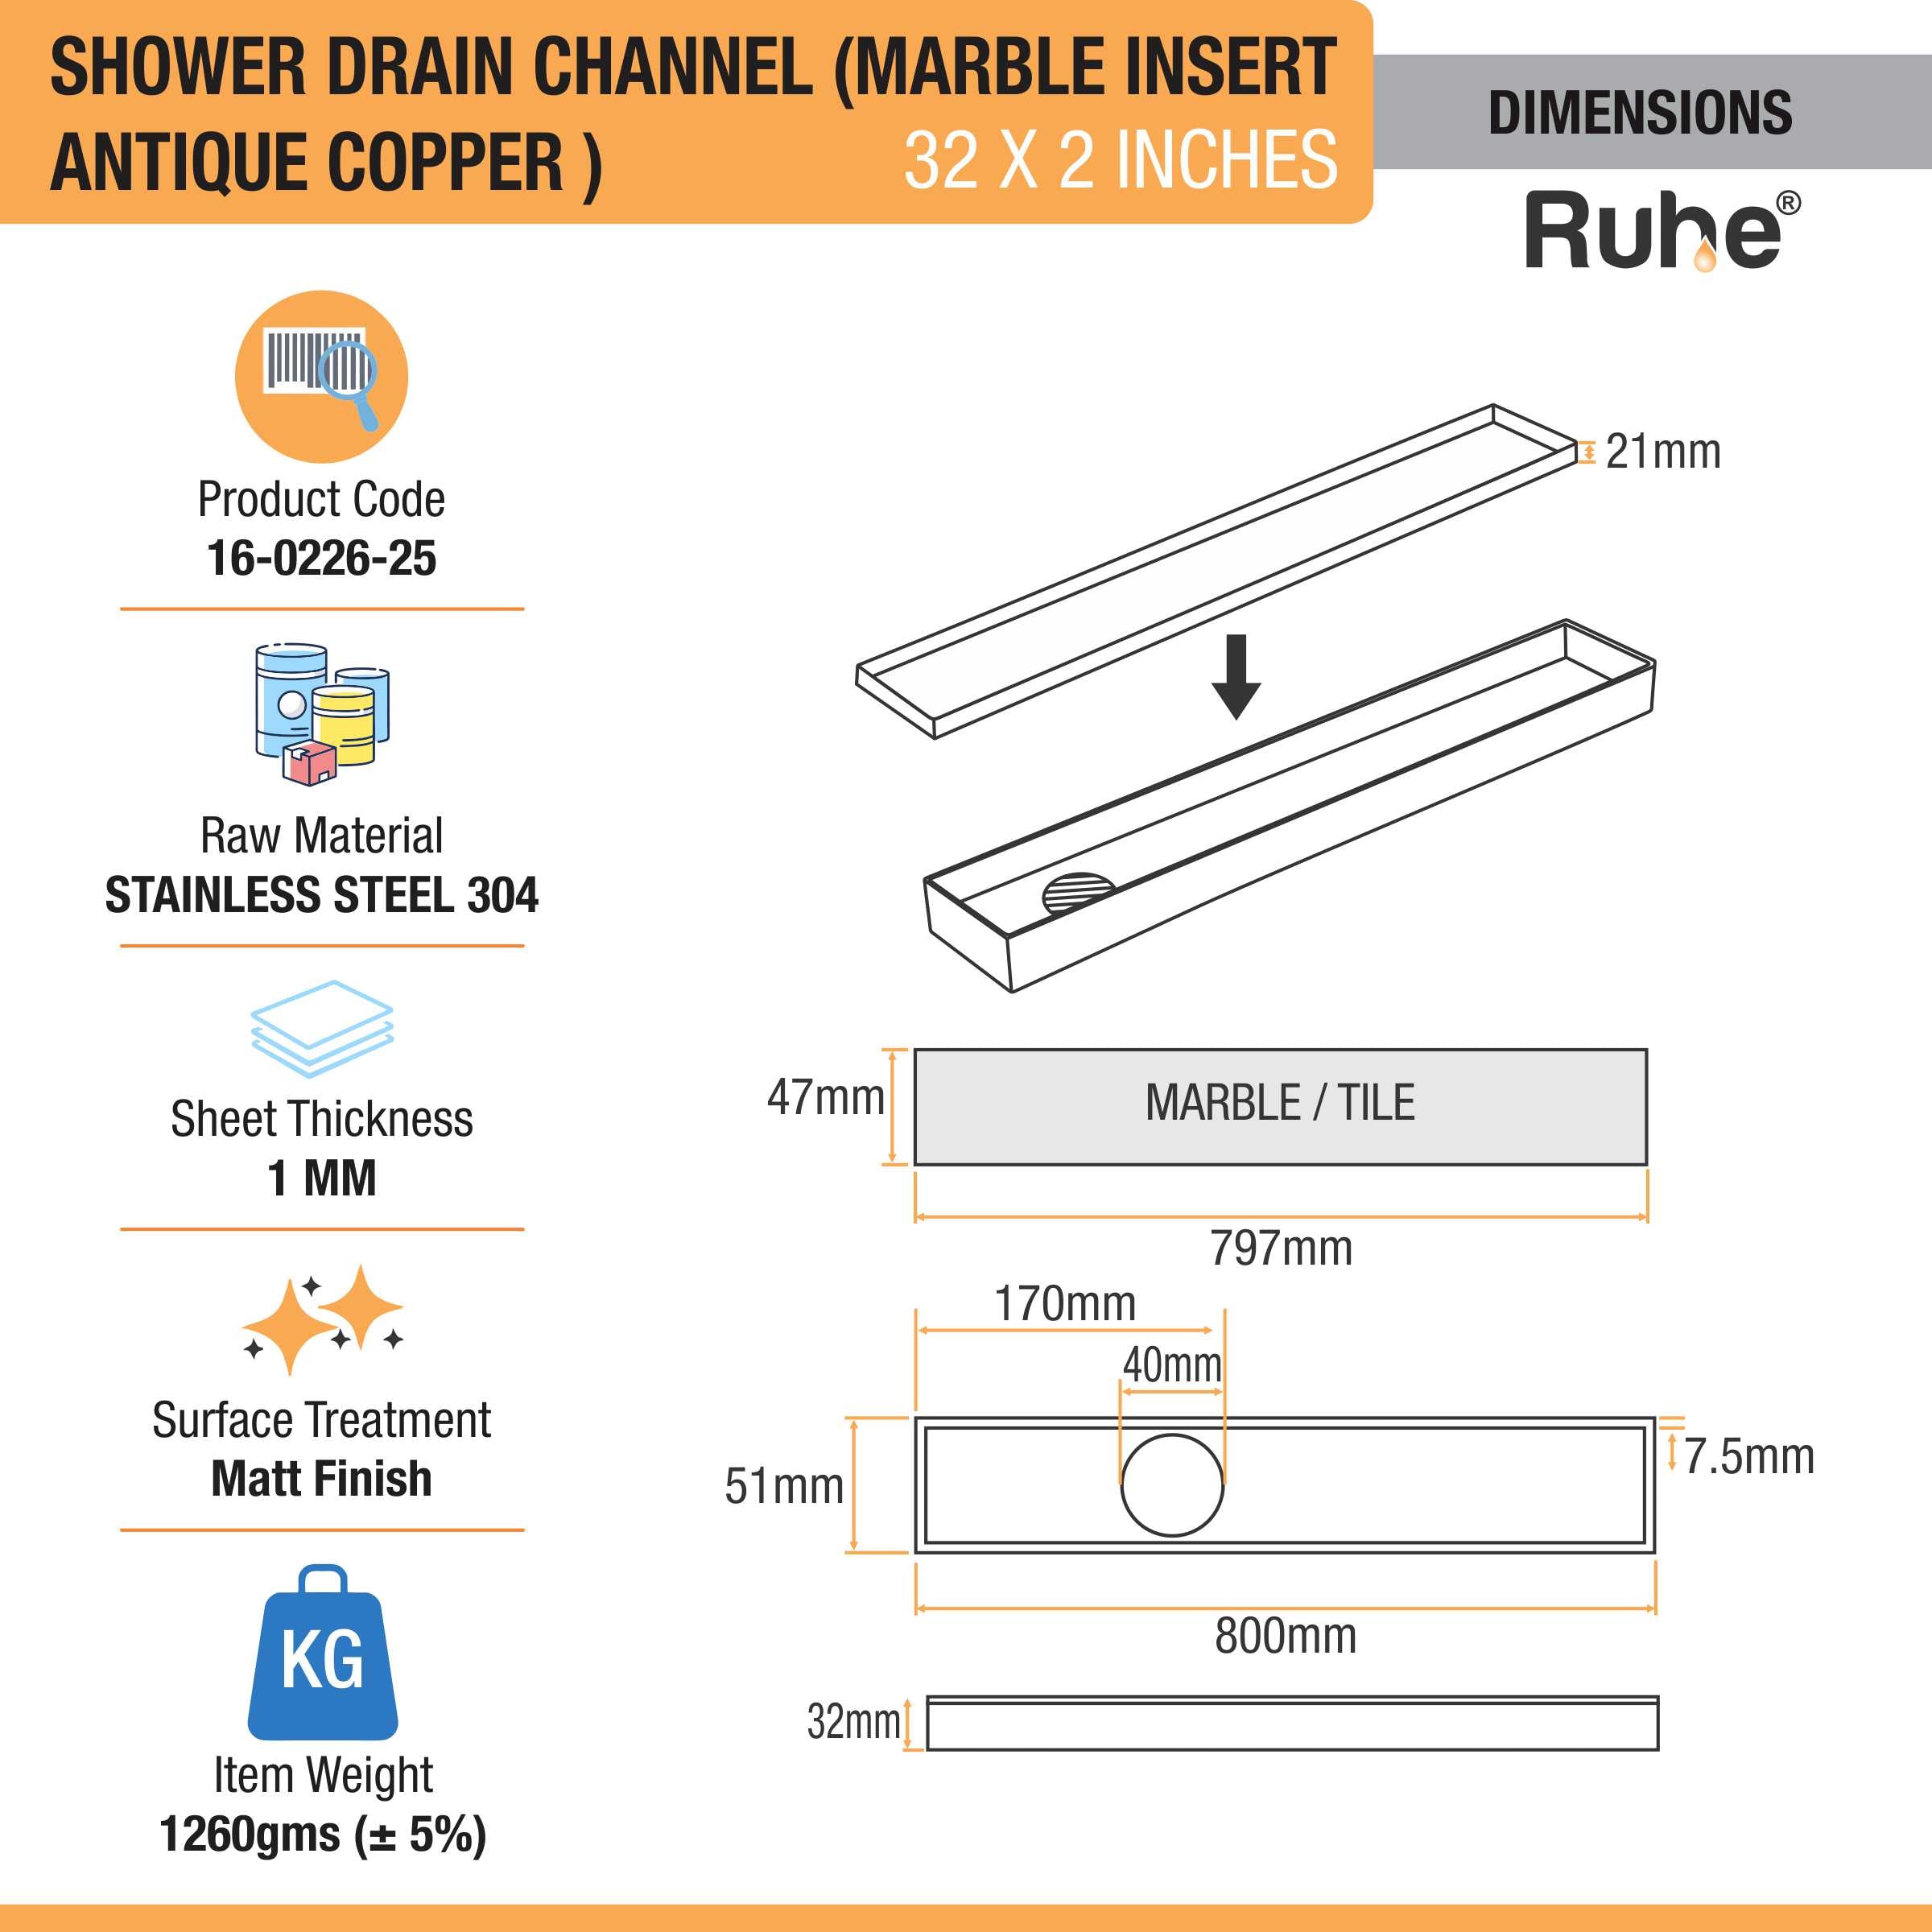 Marble Insert Shower Drain Channel (32 x 2 Inches) ANTIQUE COPPER dimensions and size